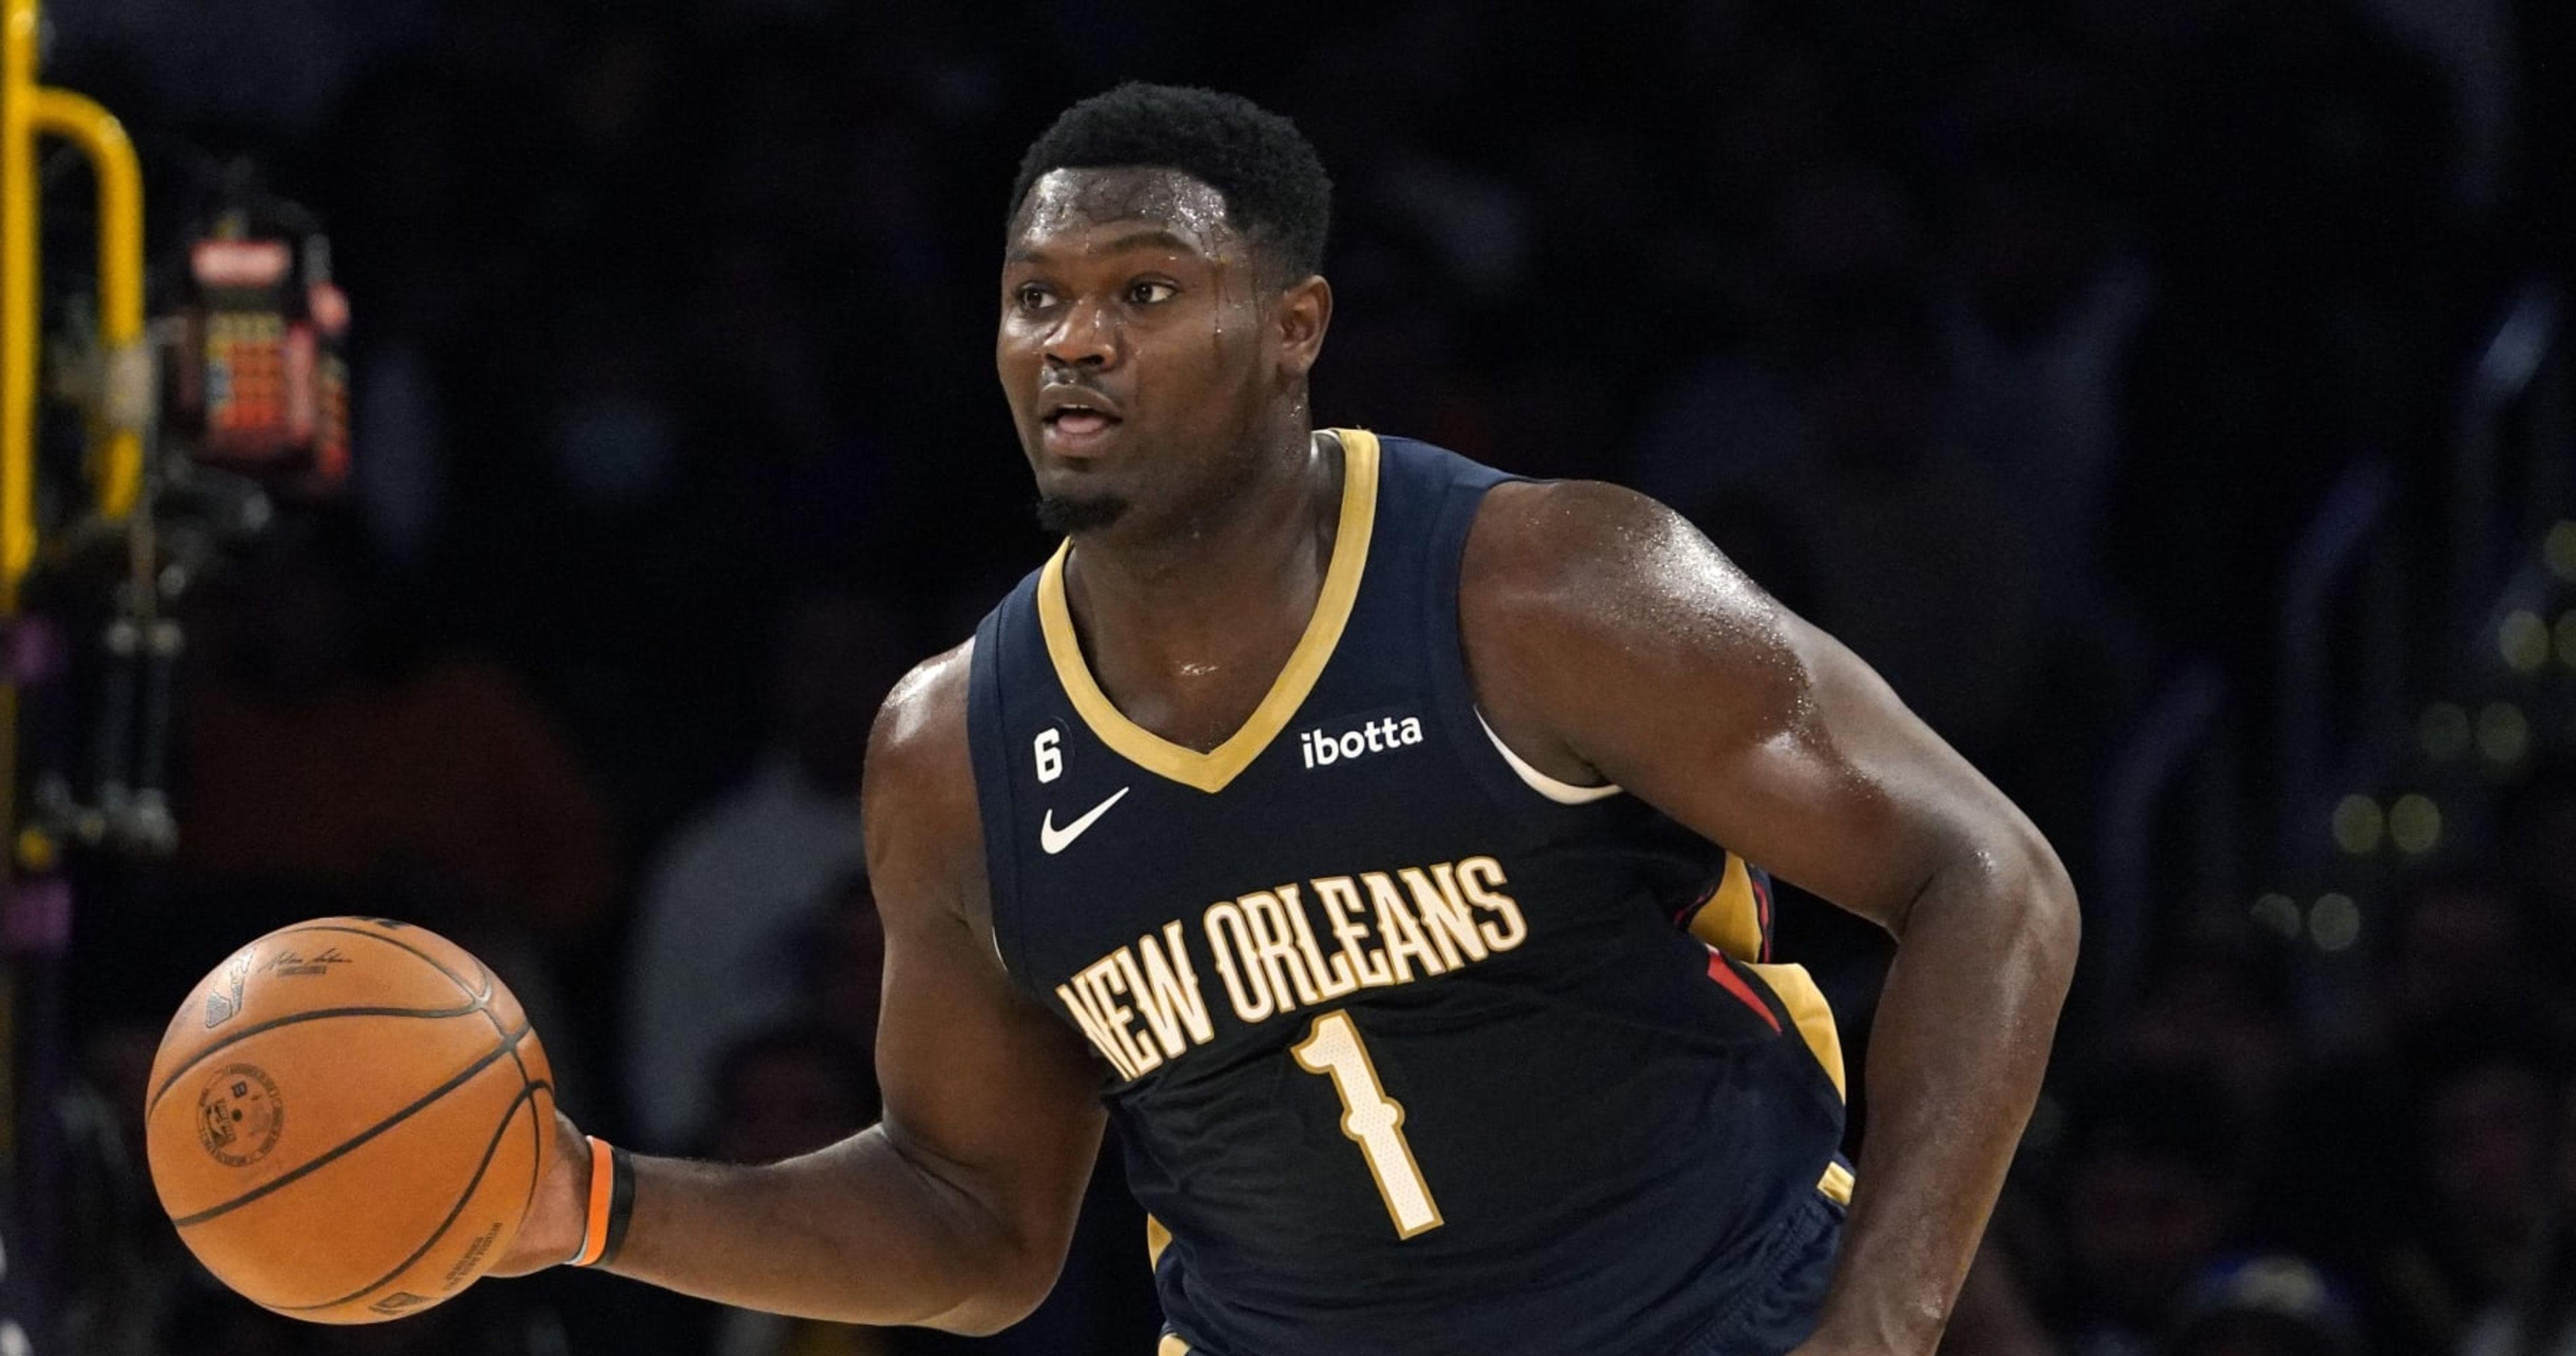 Why are analysts saying Zion Williamson needs to lose weight? - Quora